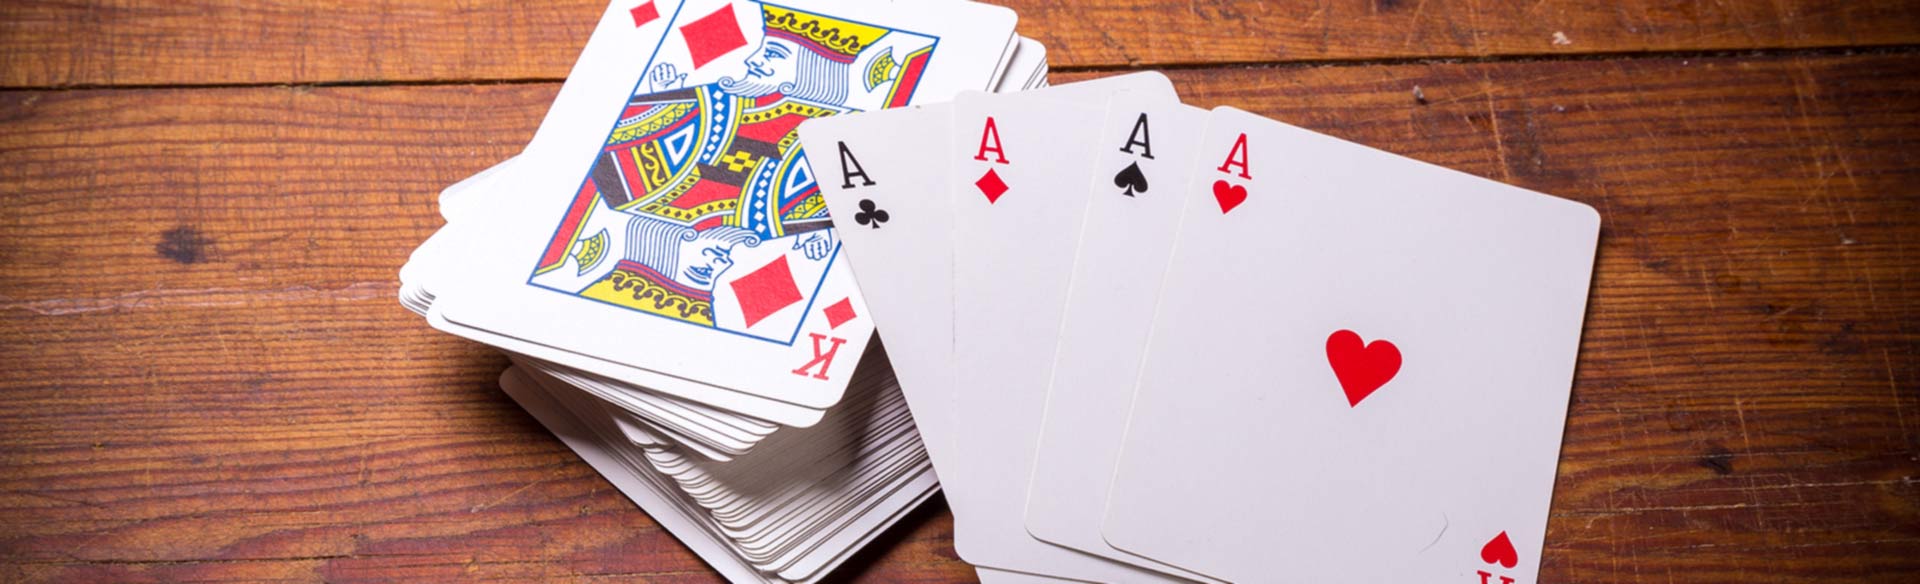 Buy all versions of your domain name and hold them like a good hand of cards